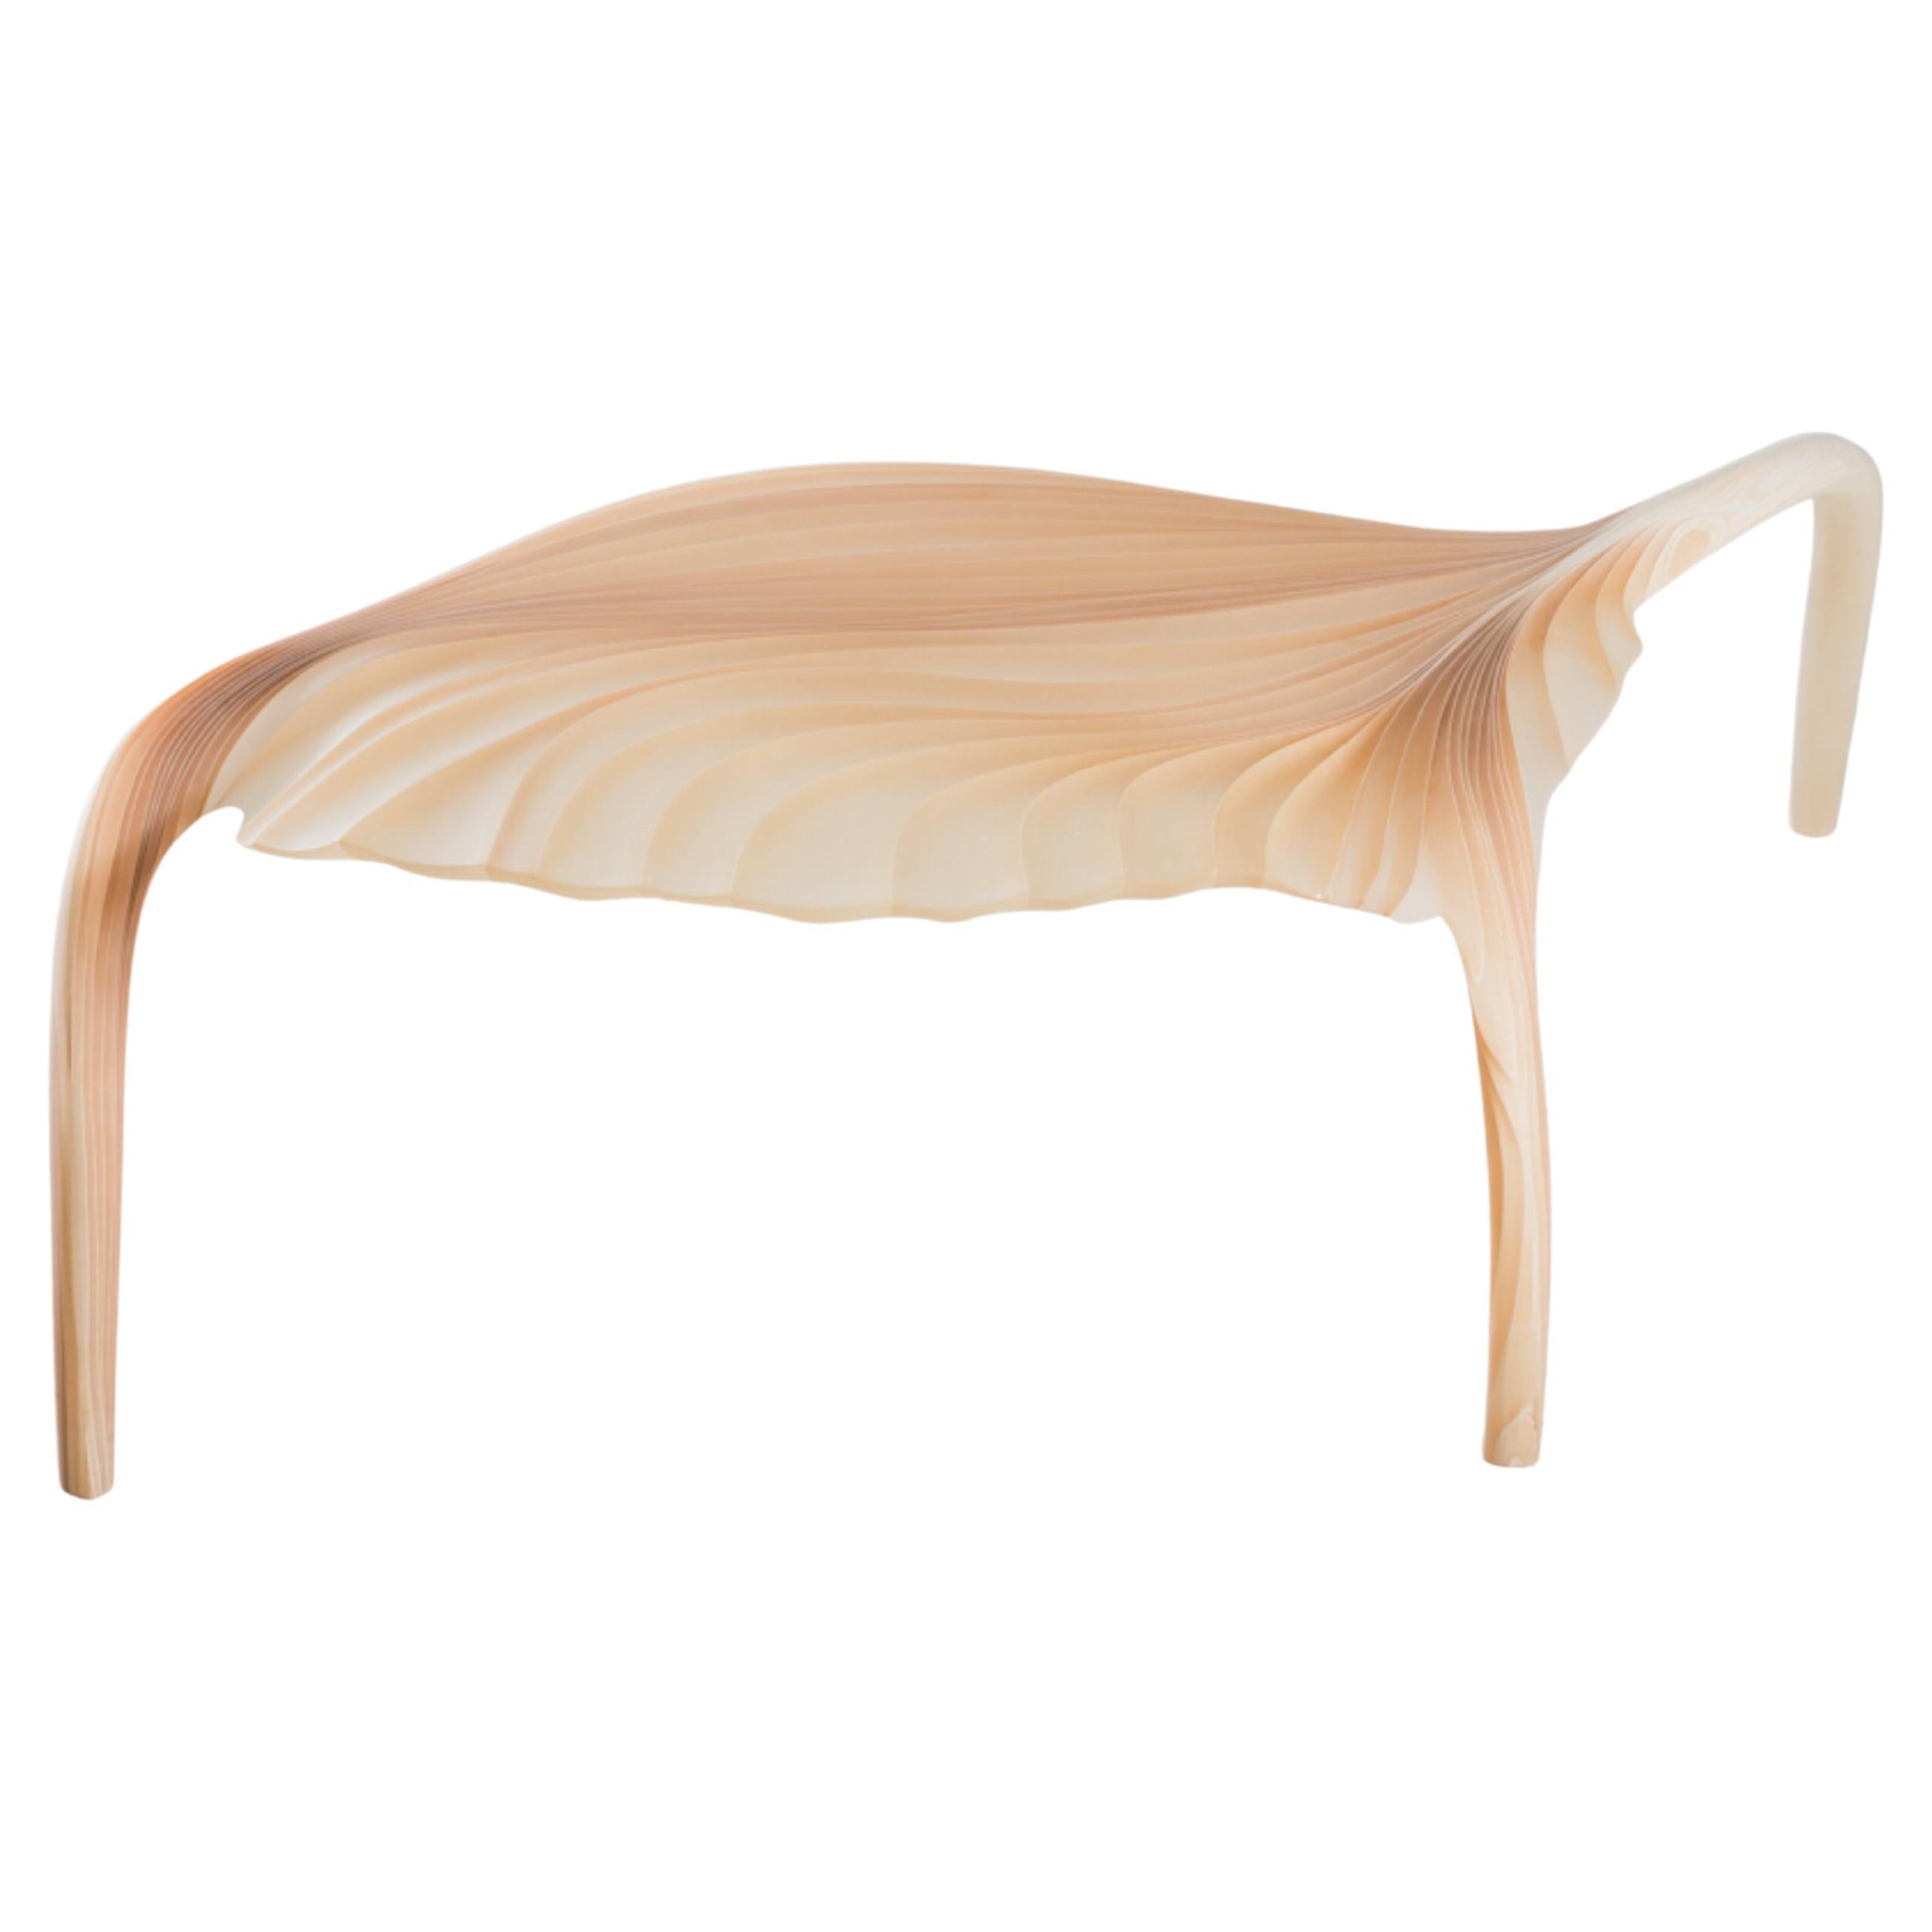 Marc Fish Ethereal Sculptural Organic Low Table Sycamore and Resin Uk 2022 For Sale